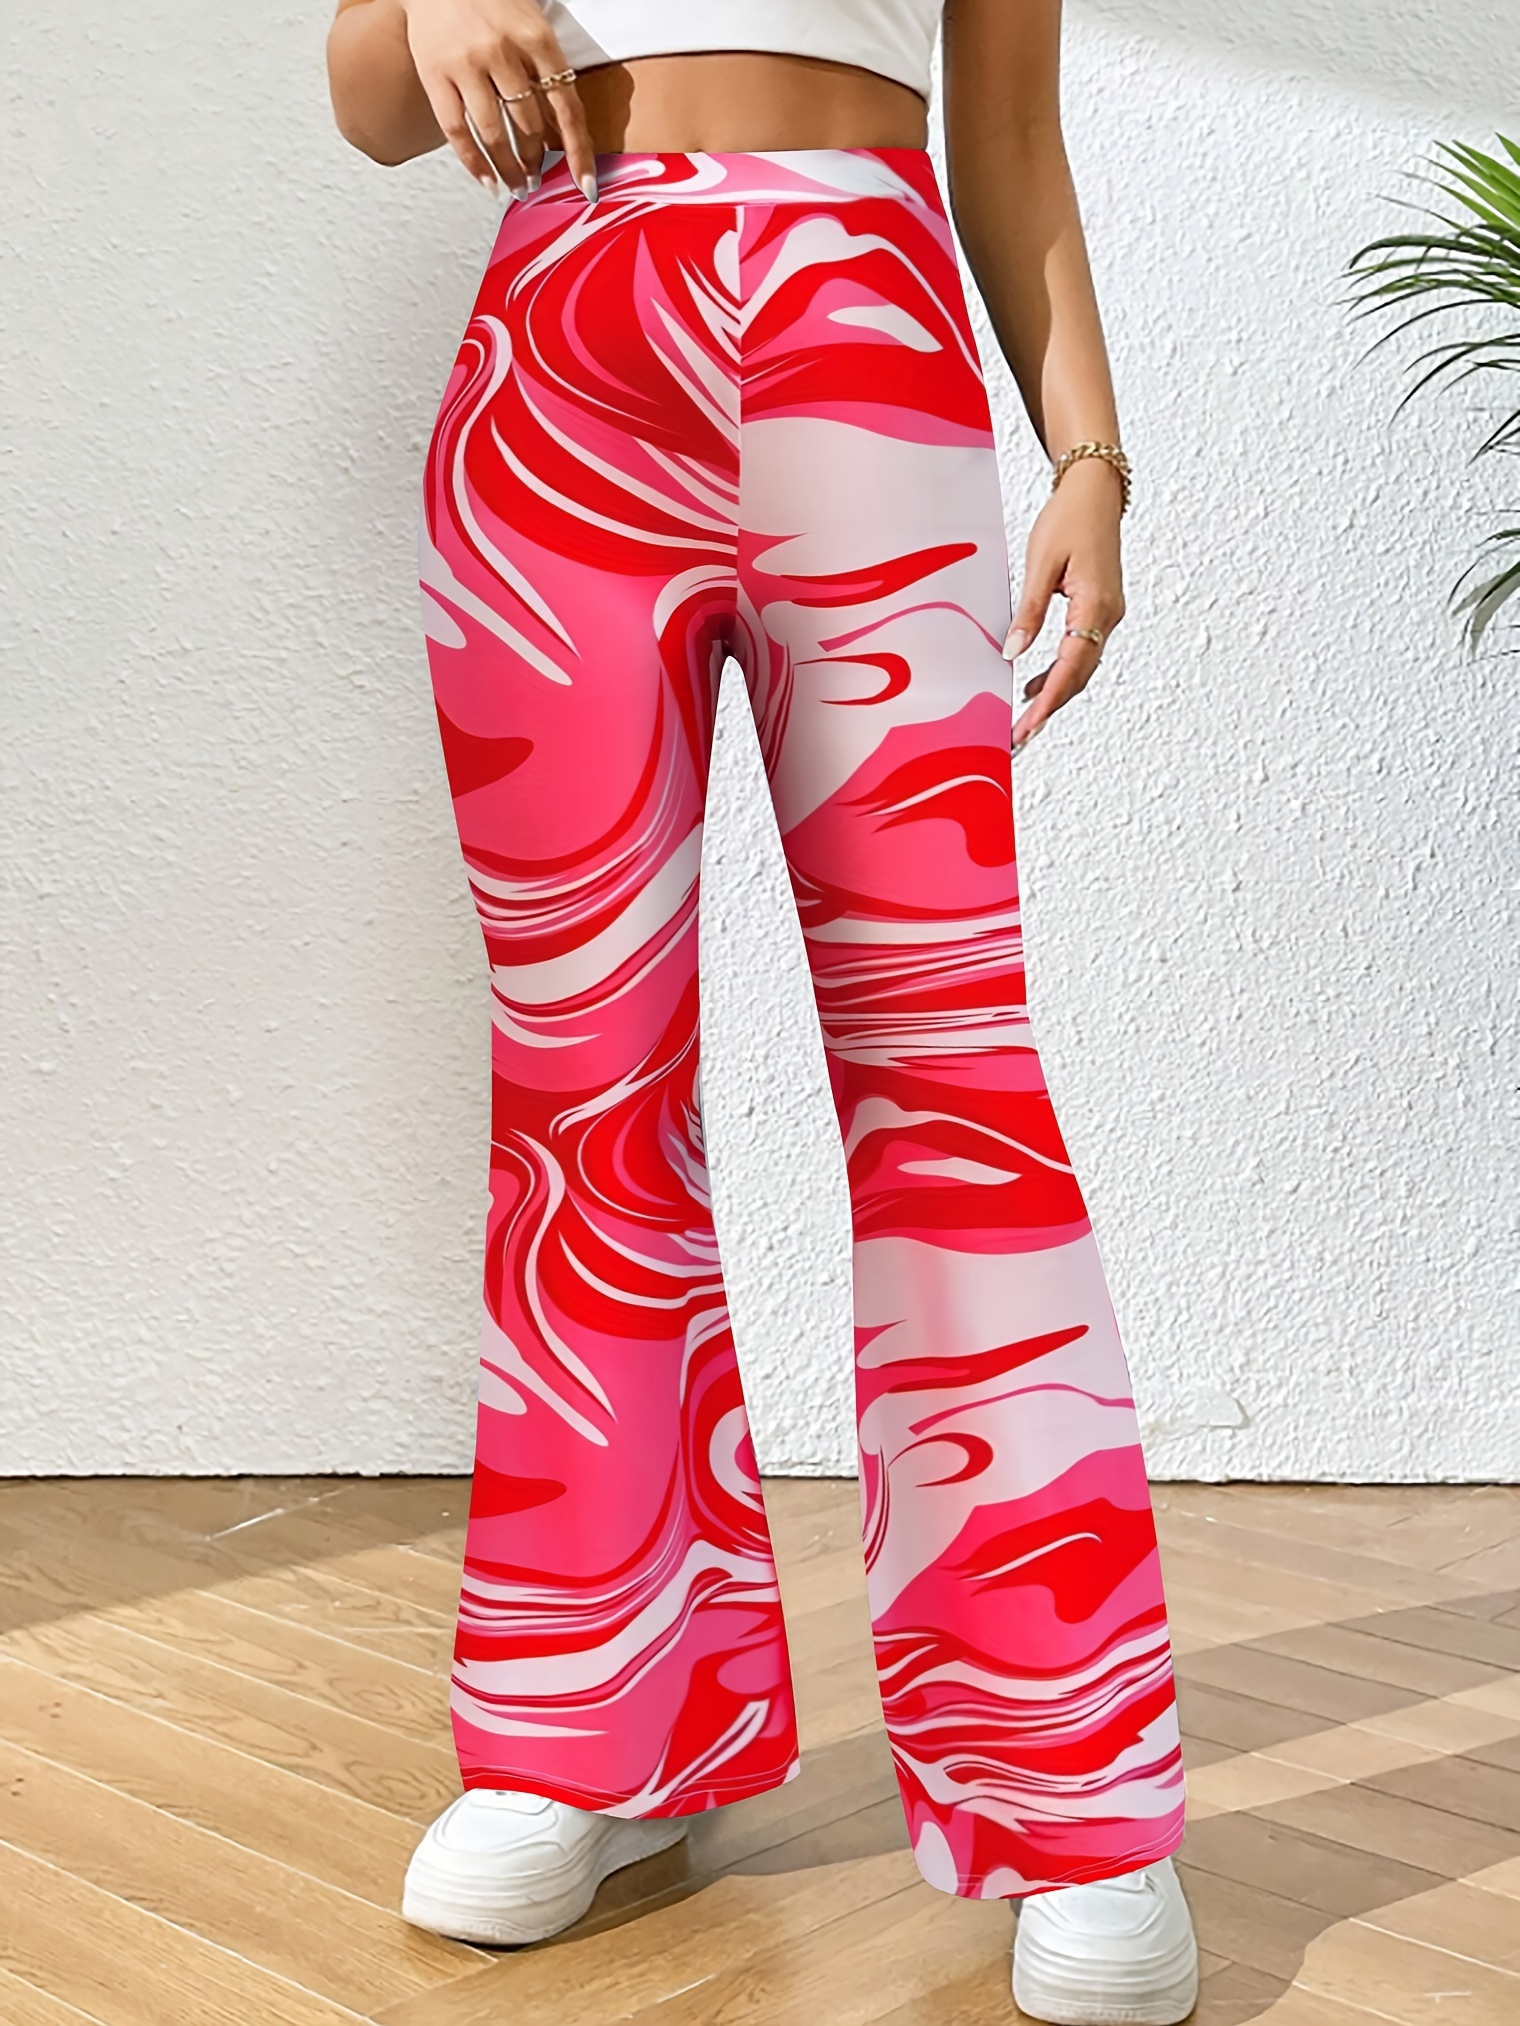 Stretchy flare pants